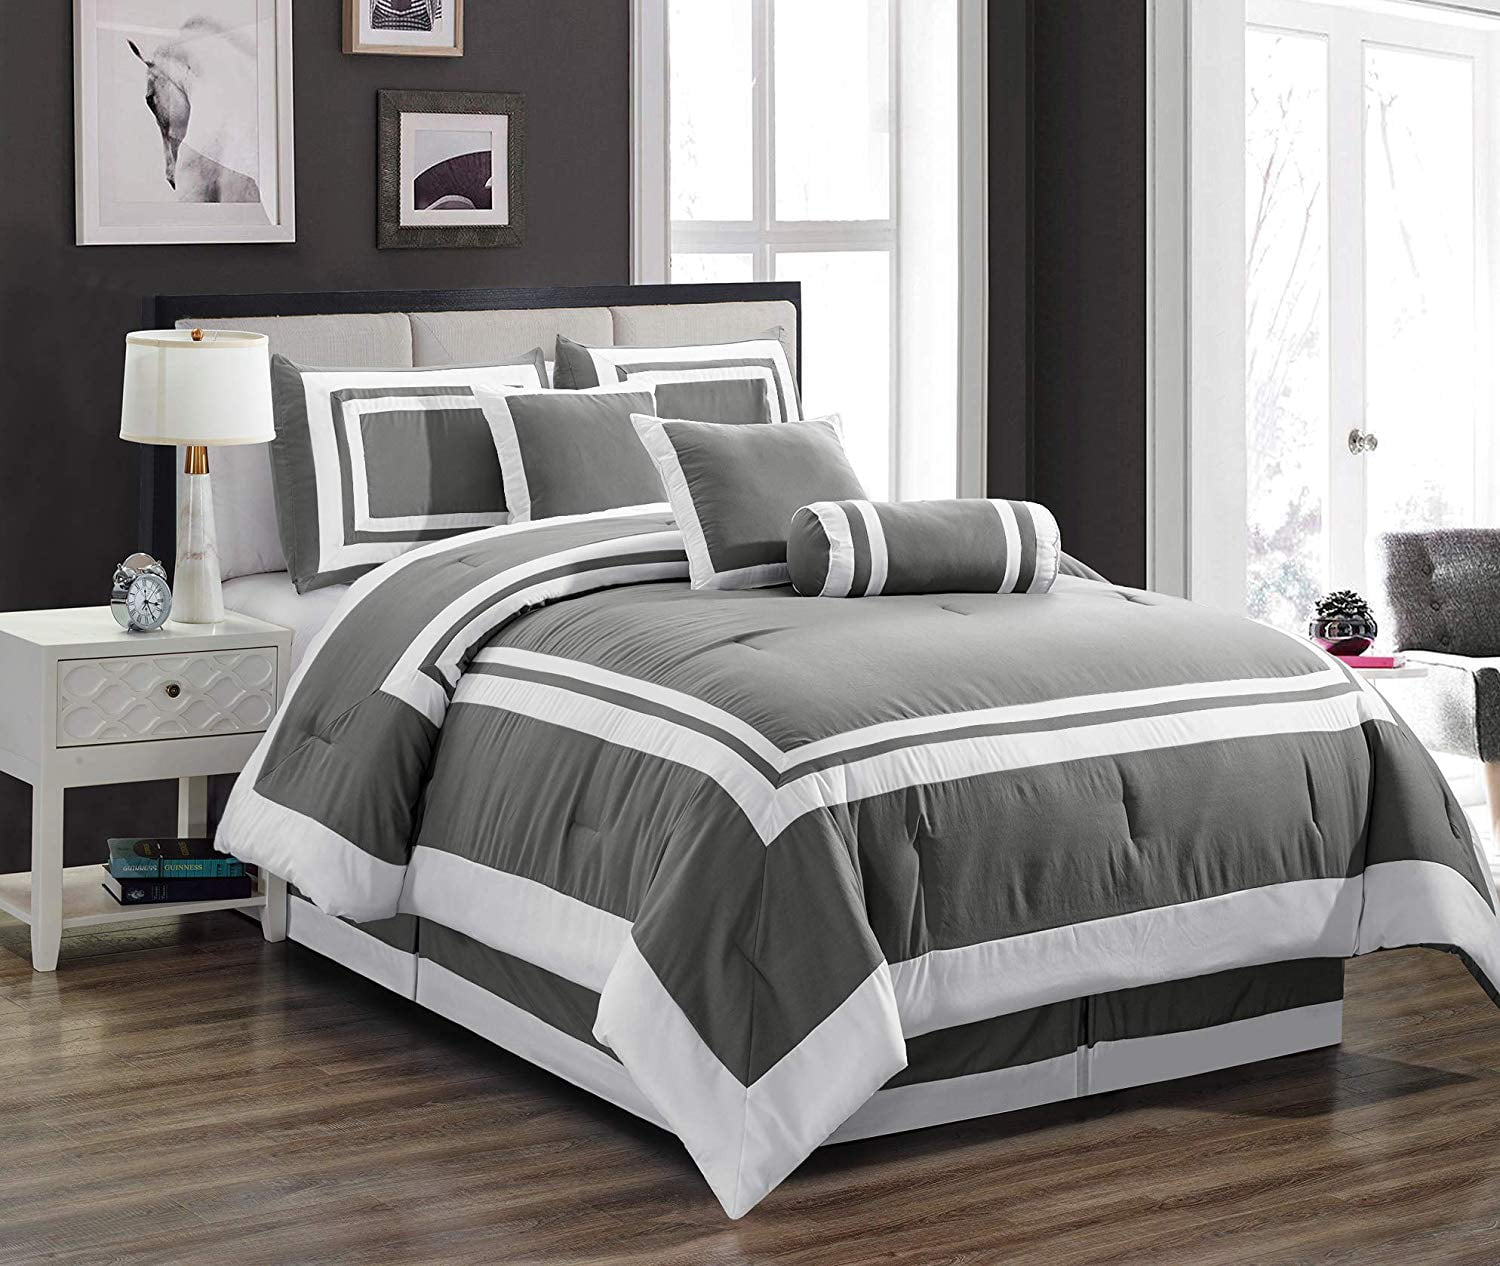 French Country Style Beautiful Gray Diamond Tufted Bedding Pinch Pleat Pin Tuck Simple Design Soft Polyester For Master Bedrooms Solid Color 4 Piece Grey Luxury Pintuck Pattern Comforter King Set